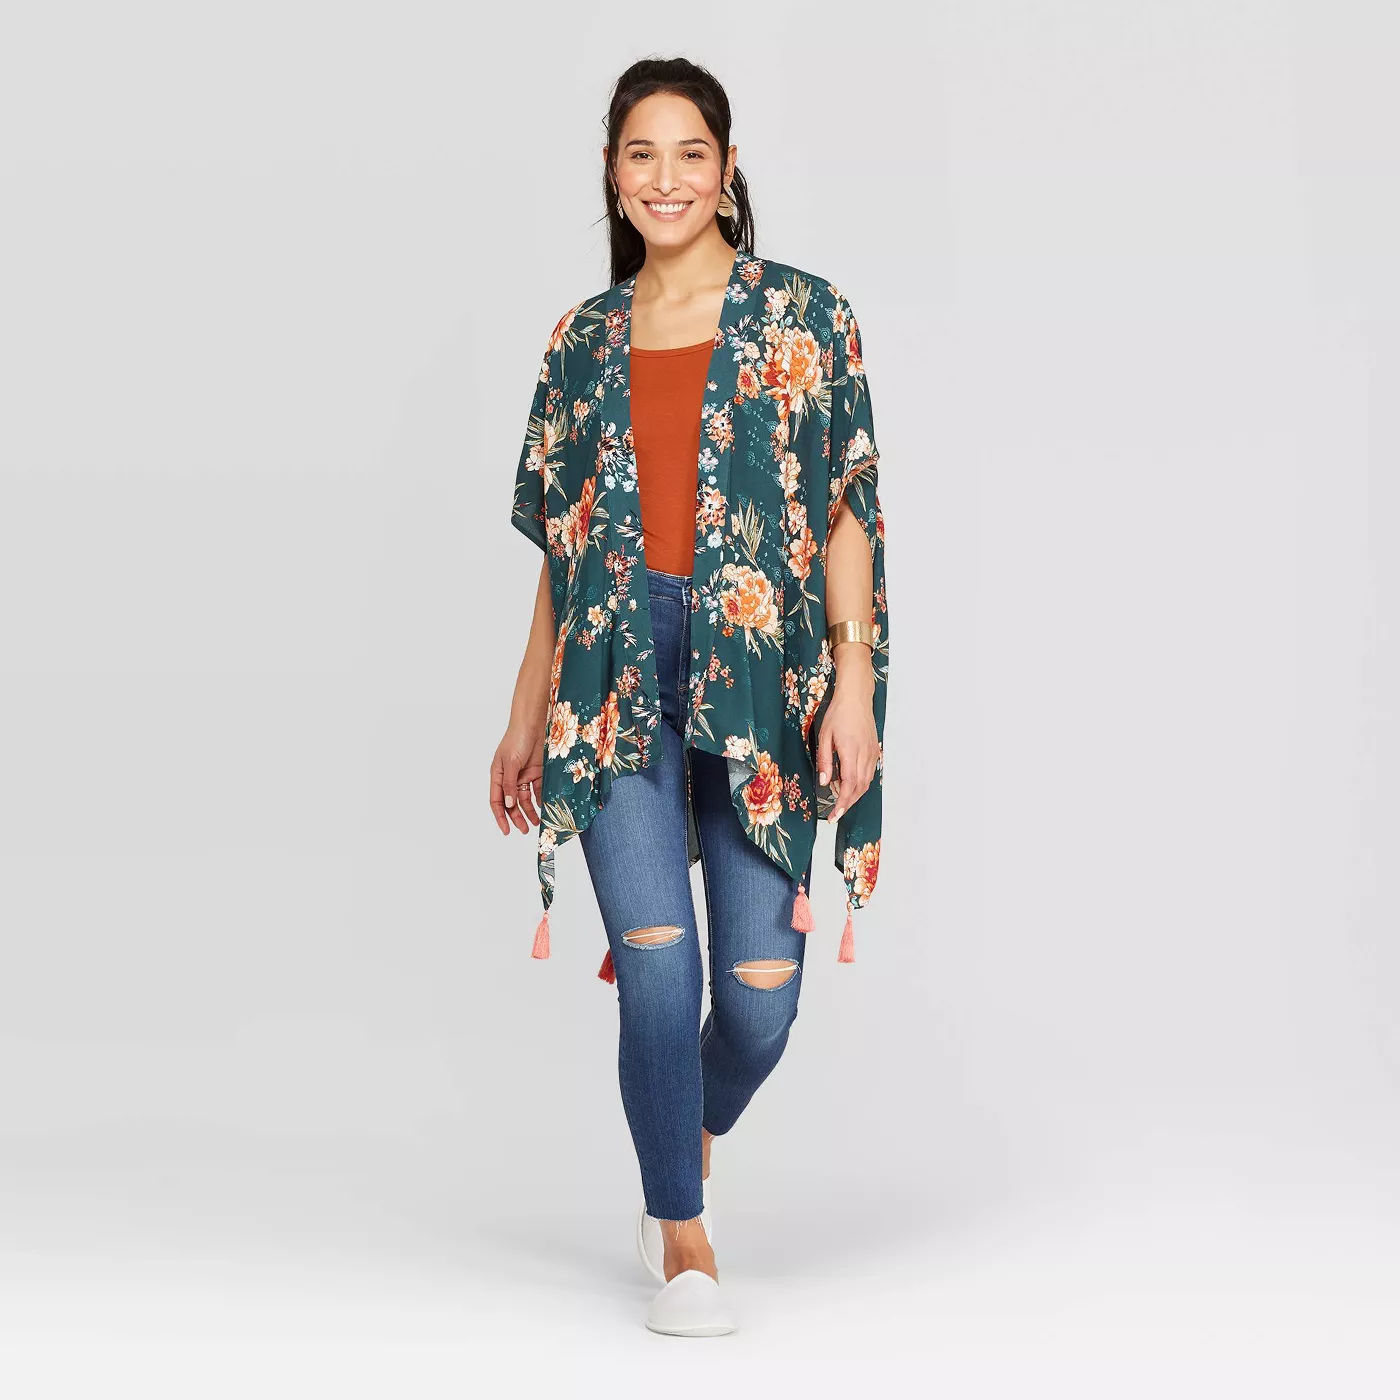 Women's Floral Print Elbow Sleeve Open-Front kimono Jacket - Knox Roseâ„¢ Green - image 1 of 2